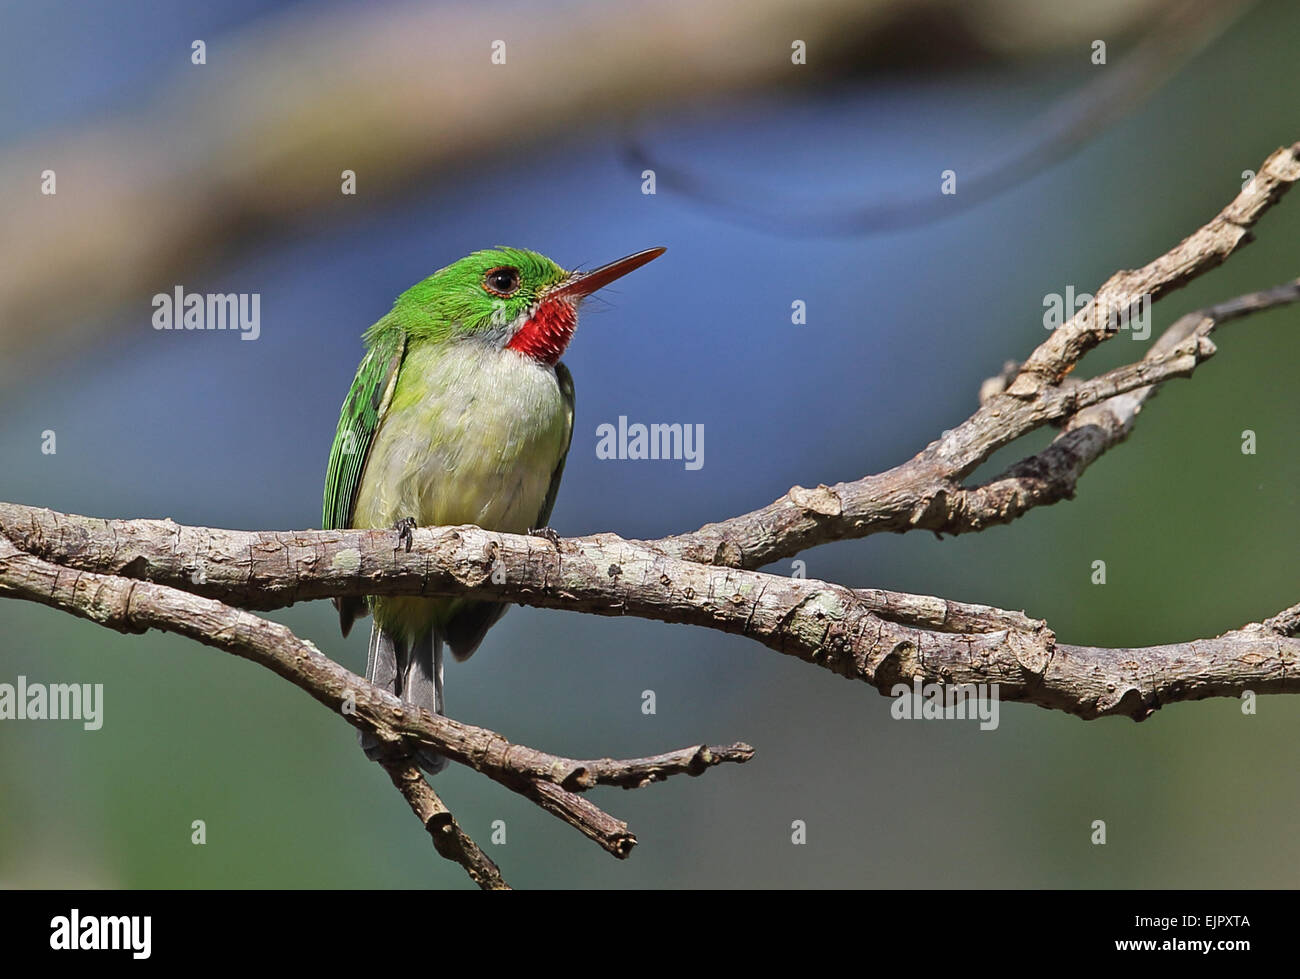 Jamaican Tody (Todus todus) adult, perched on twig, Marshall's Pen, Jamaica, December Stock Photo